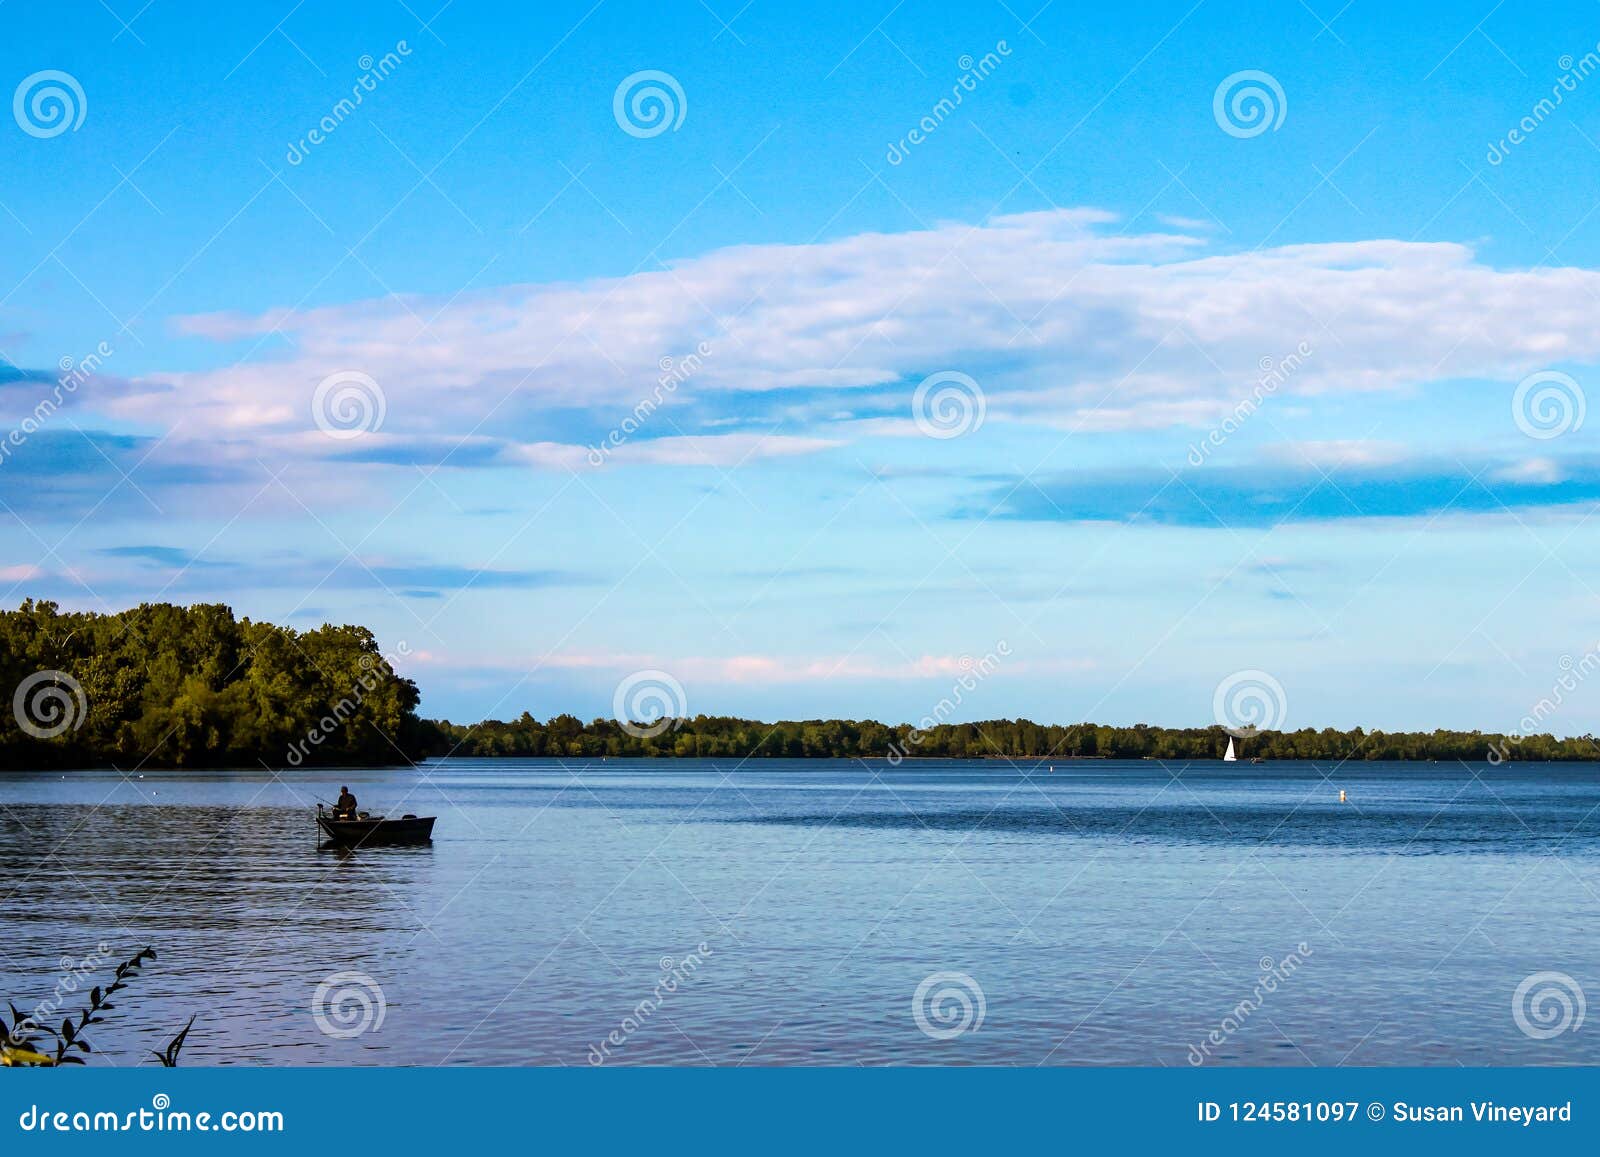 fisherman in boat on lake with sailboat in the distance - lake erie